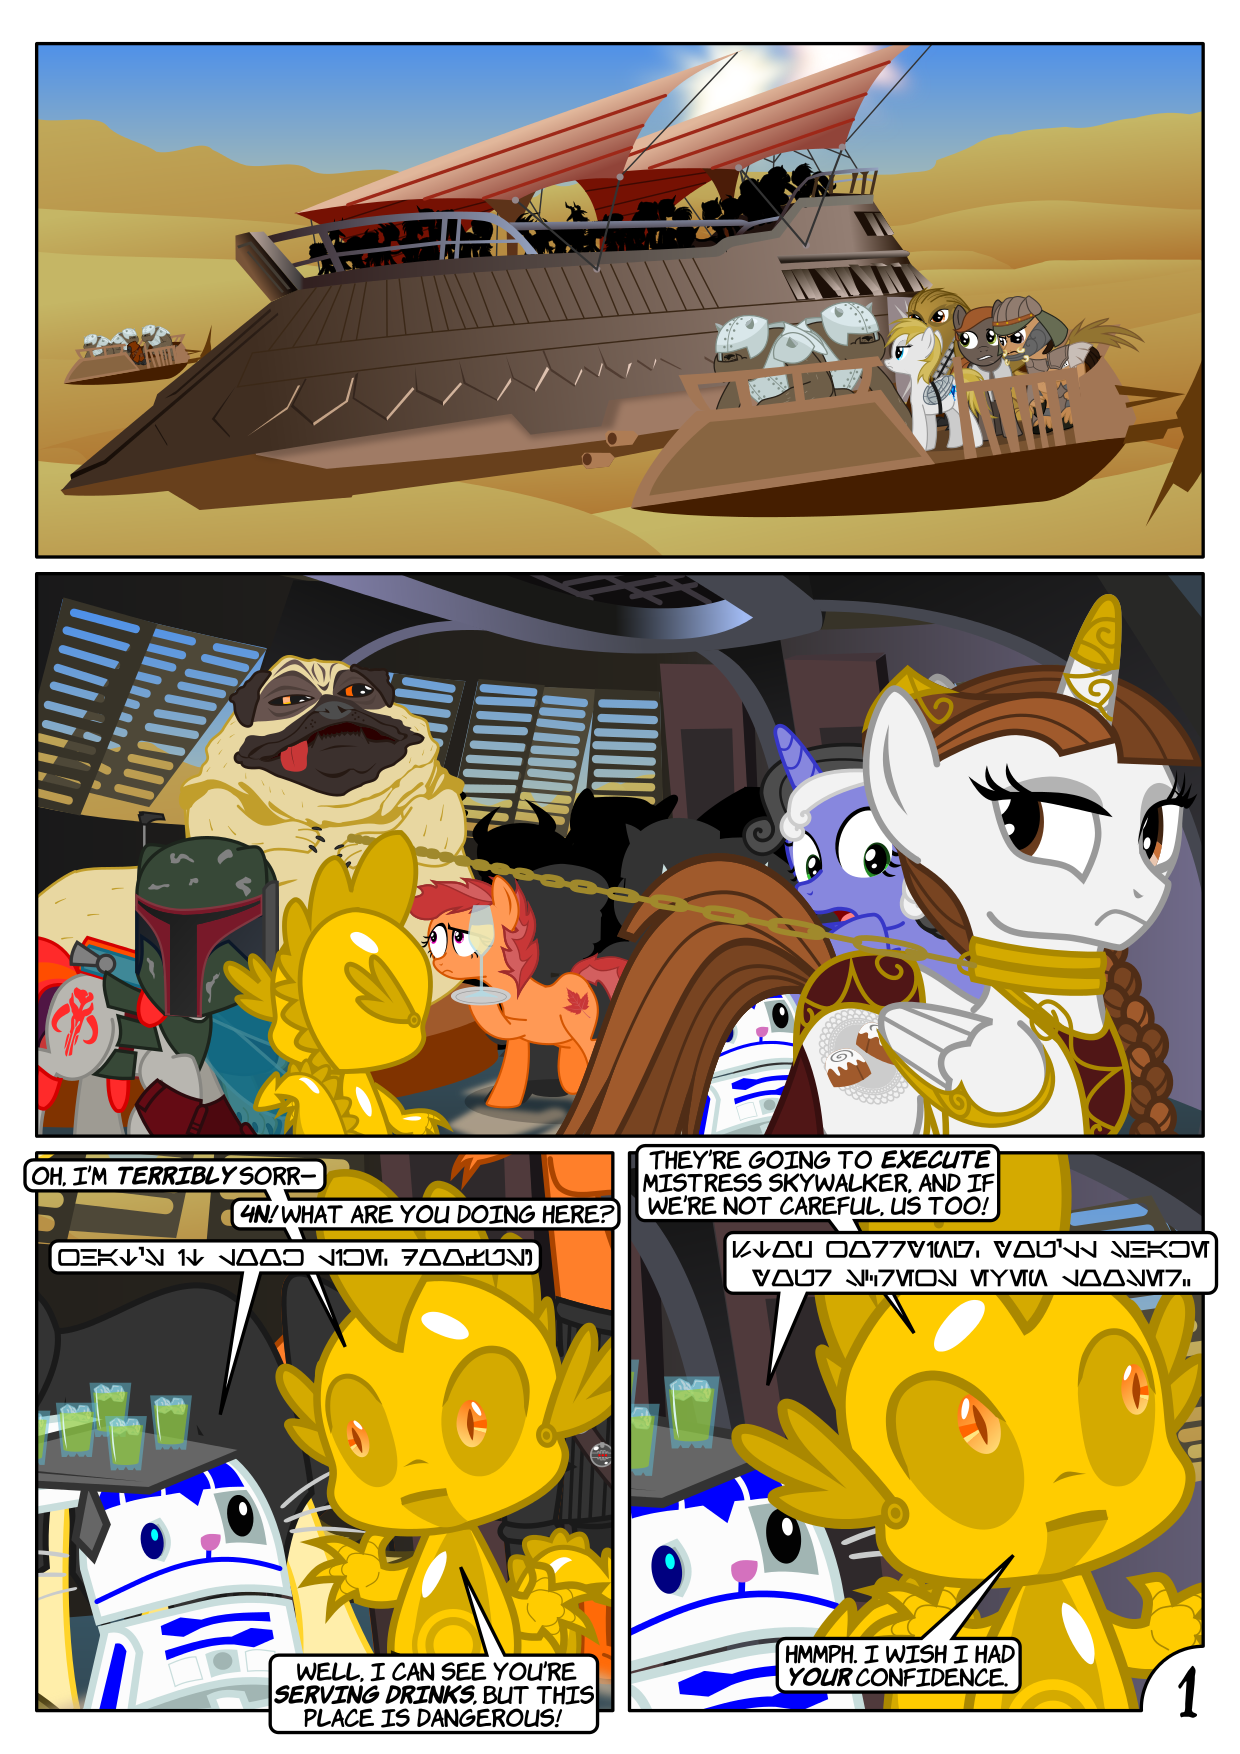 Star Mares 3.2.1: O We Sail the Desert Yellow